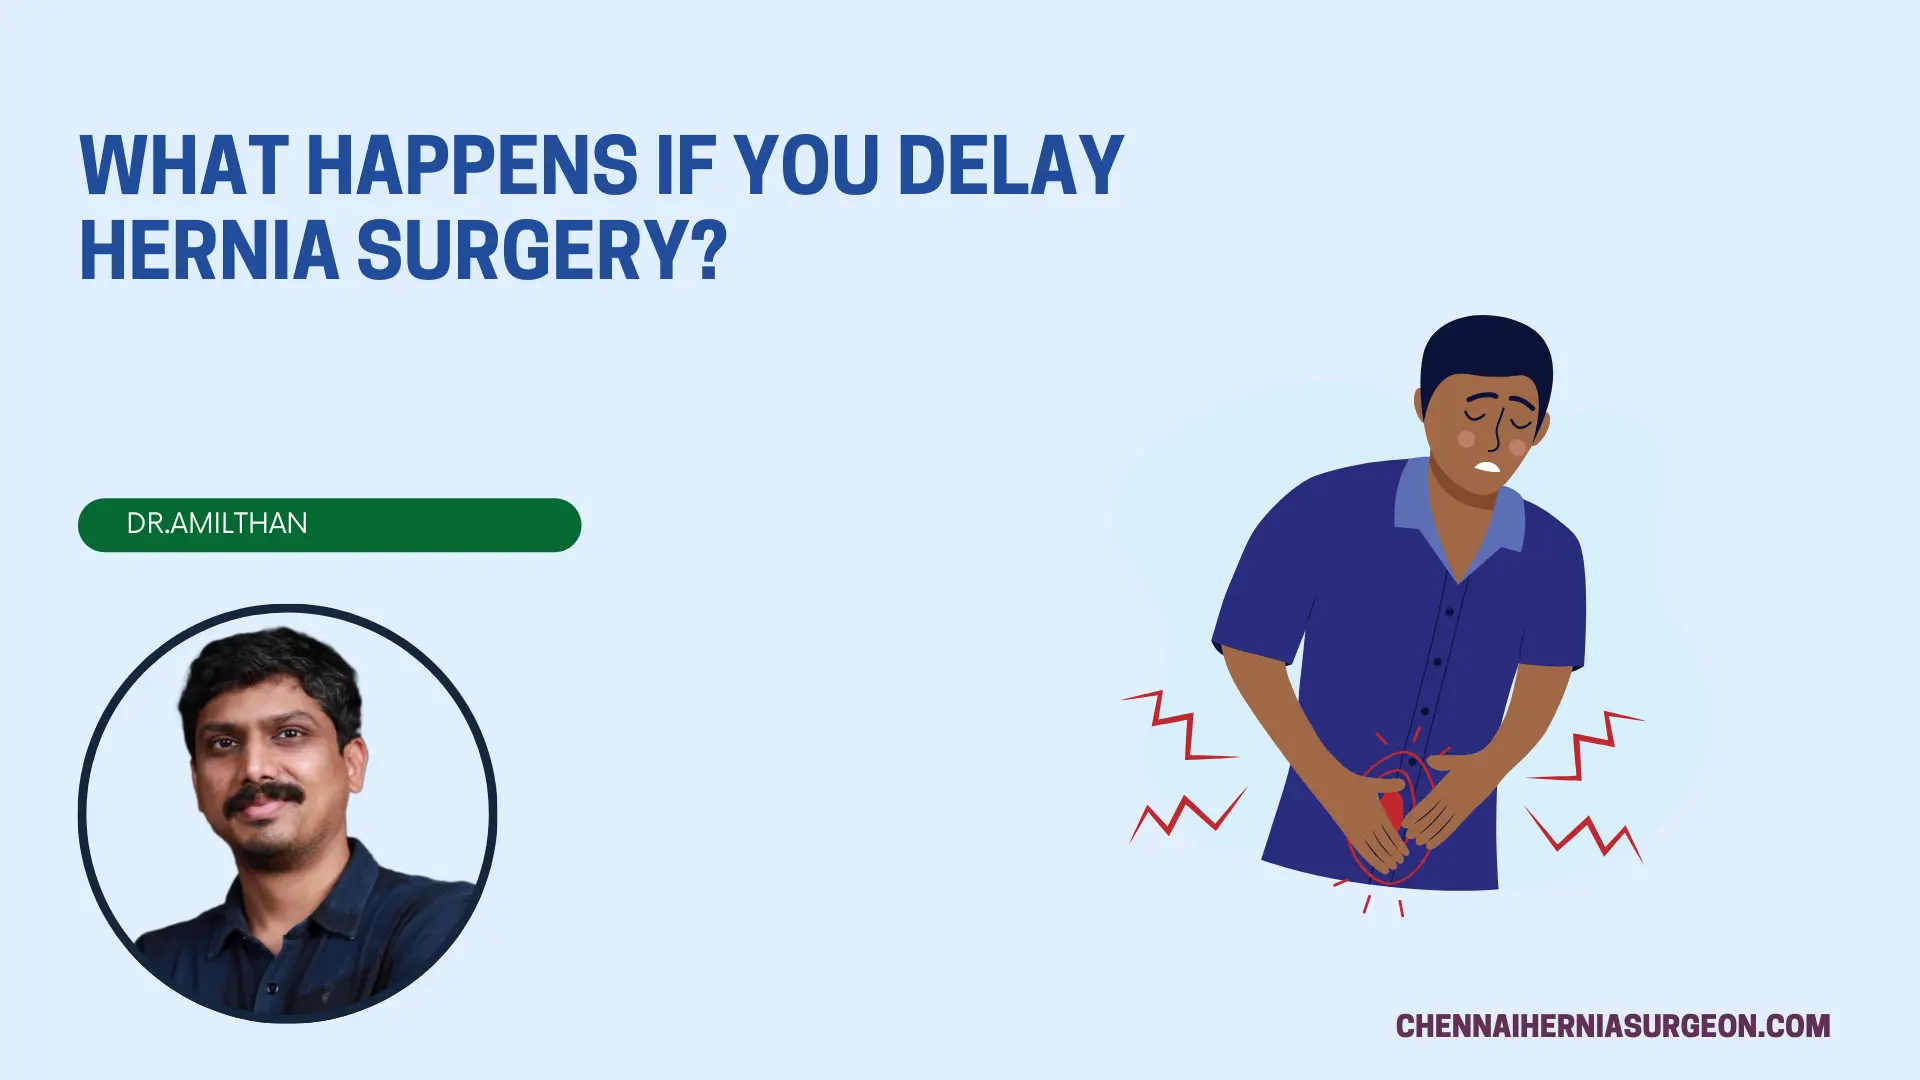 What happens if you delay hernia surgery